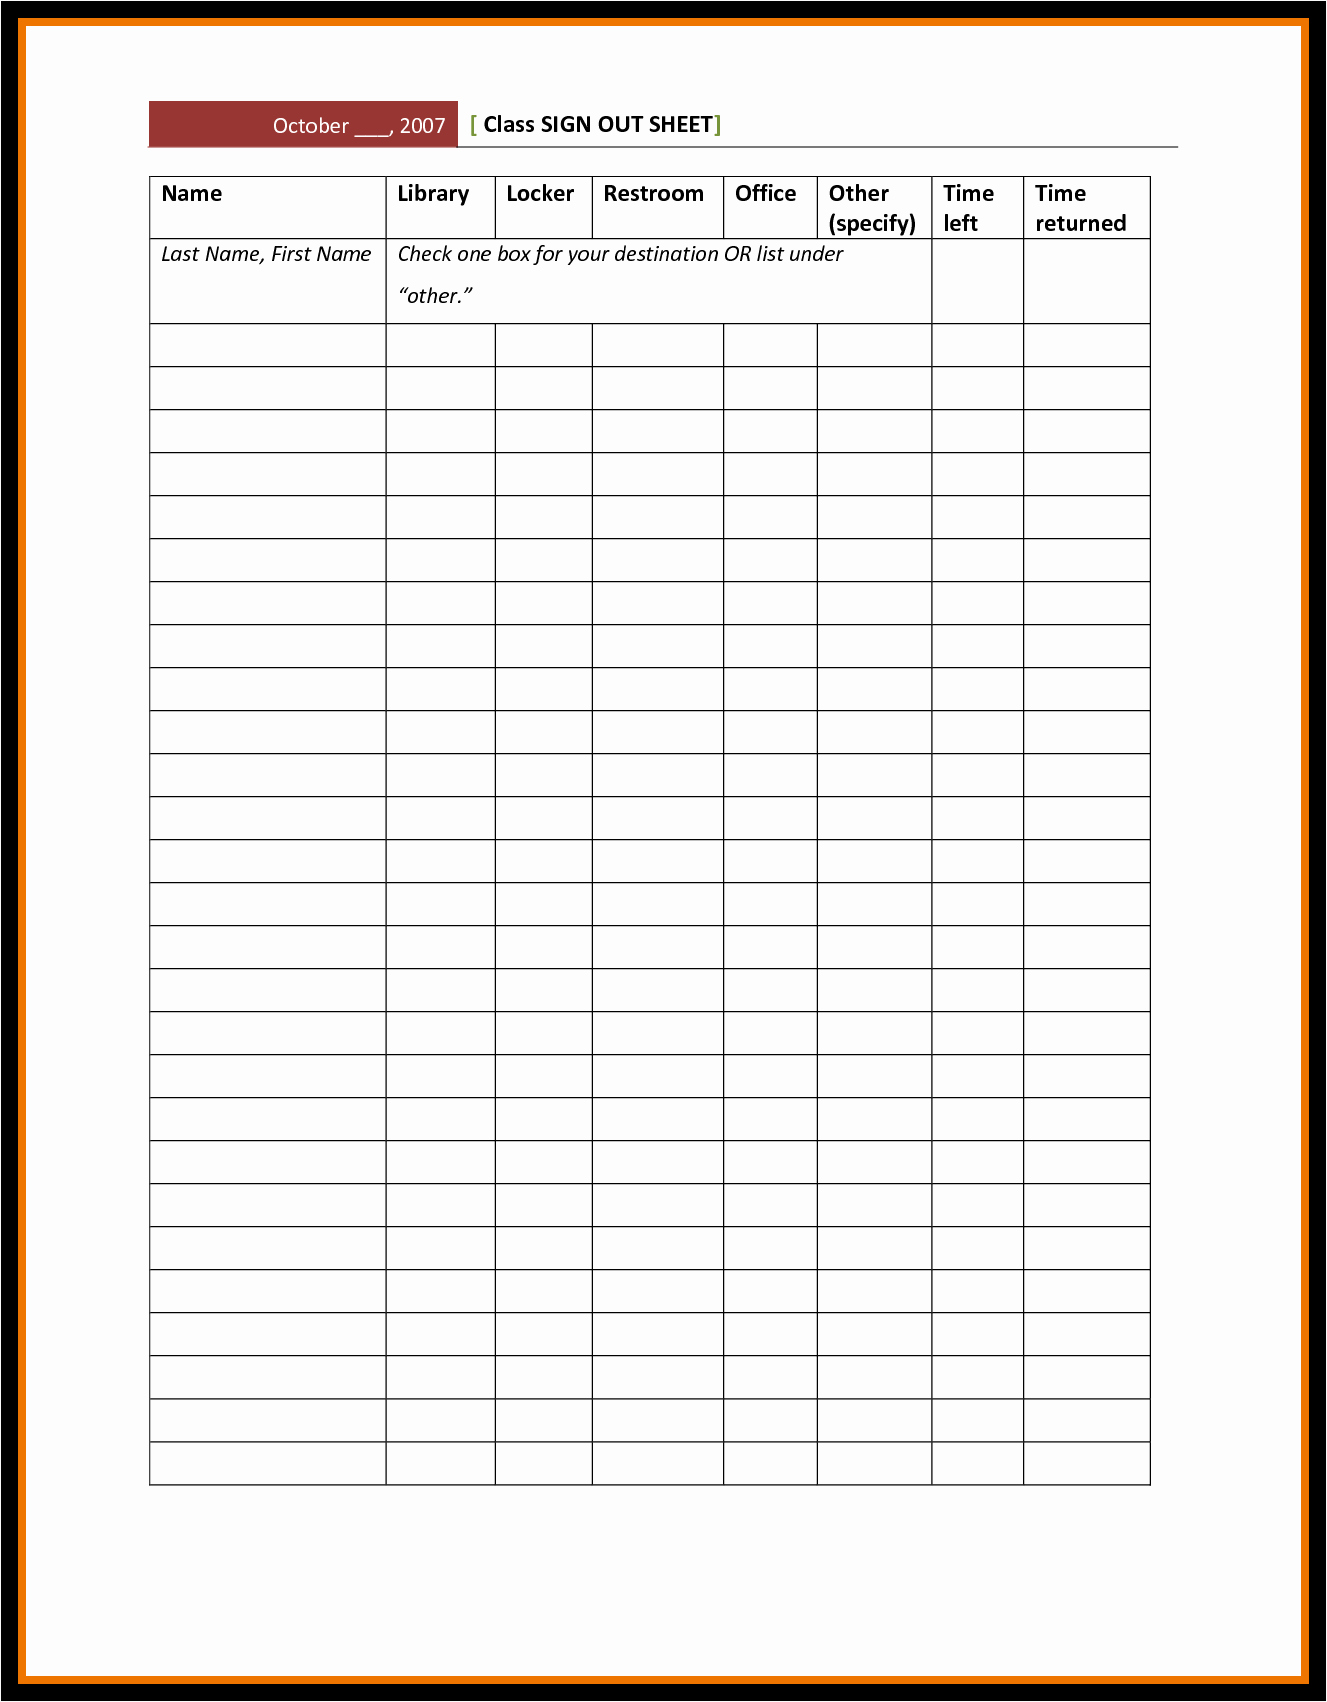 Signing In and Out Template Luxury 12 Sign Out Sheet Template attendance Download Image